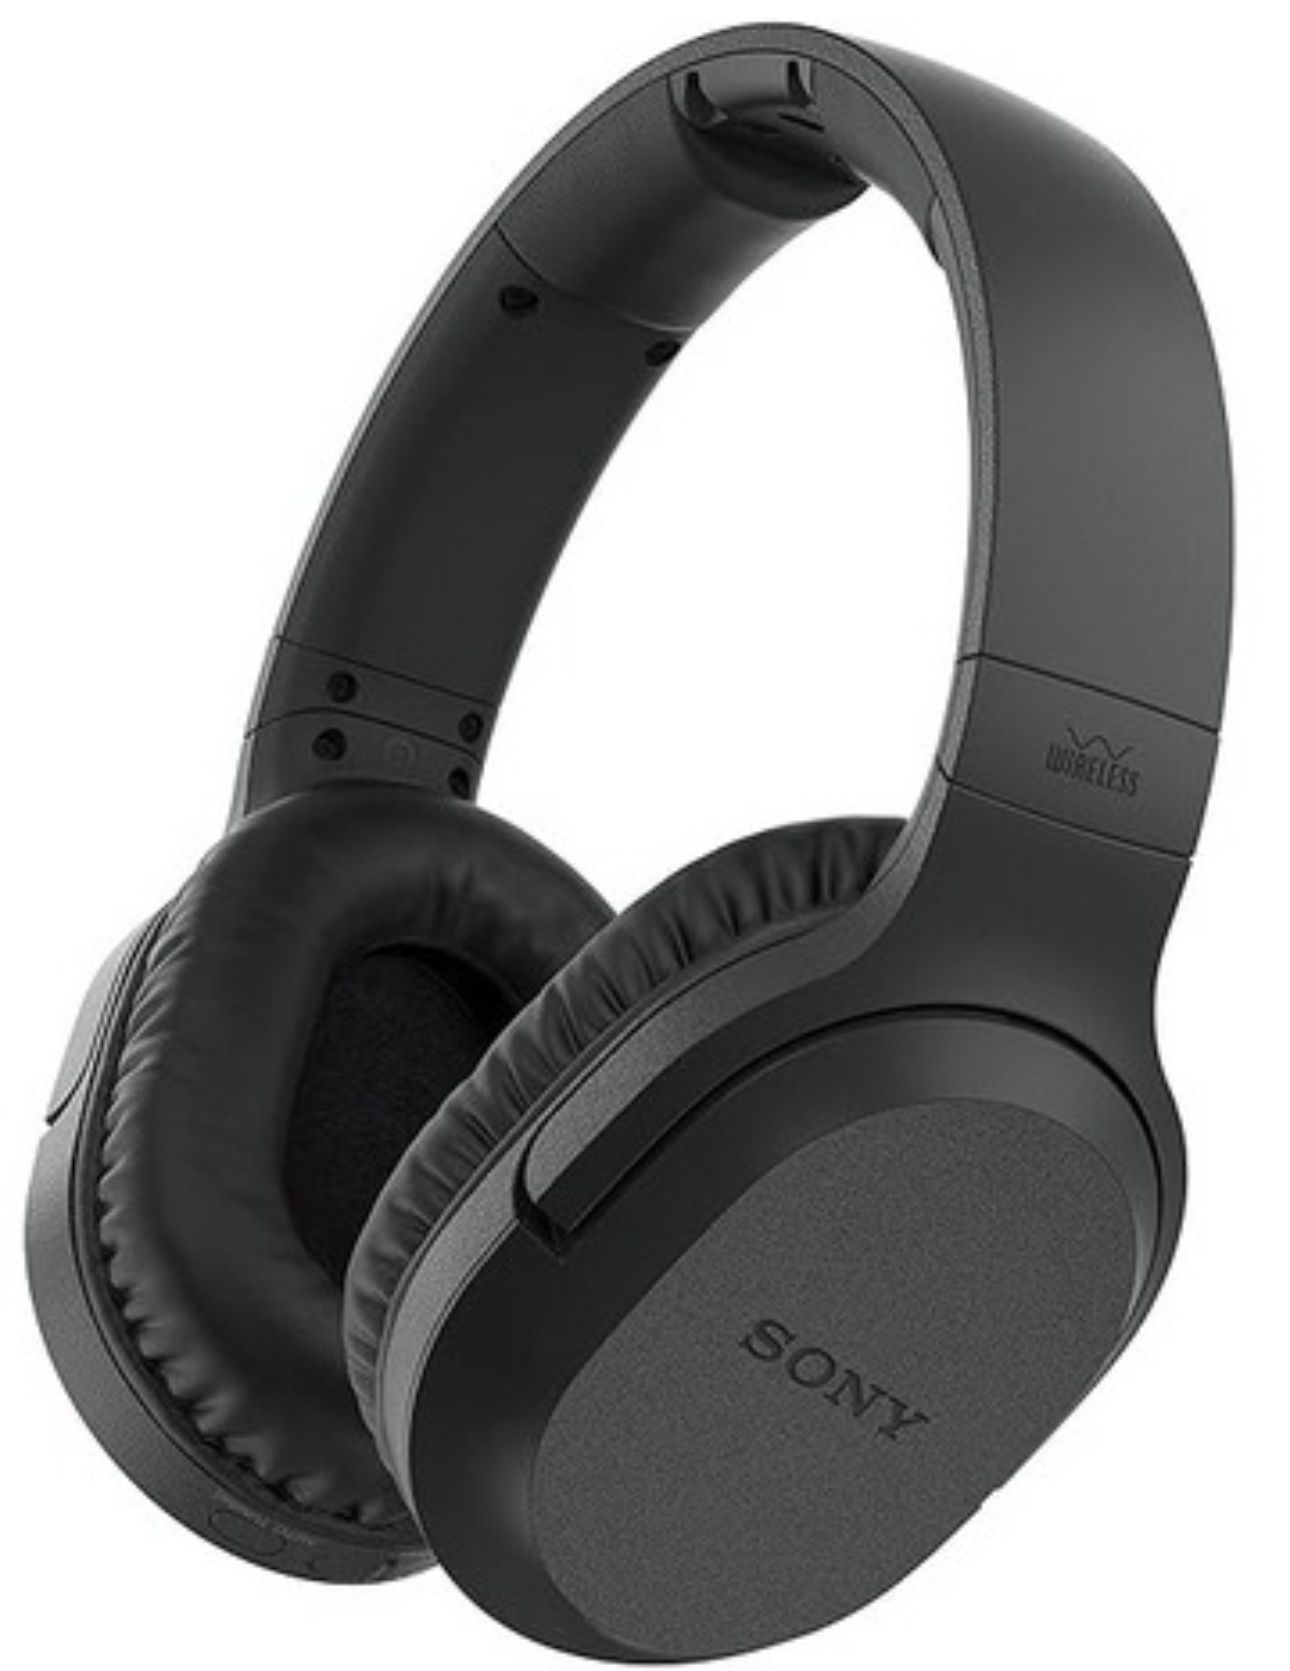 Sony RF400 Wireless Home Theater Headphones for Watching TV (WHRF400)